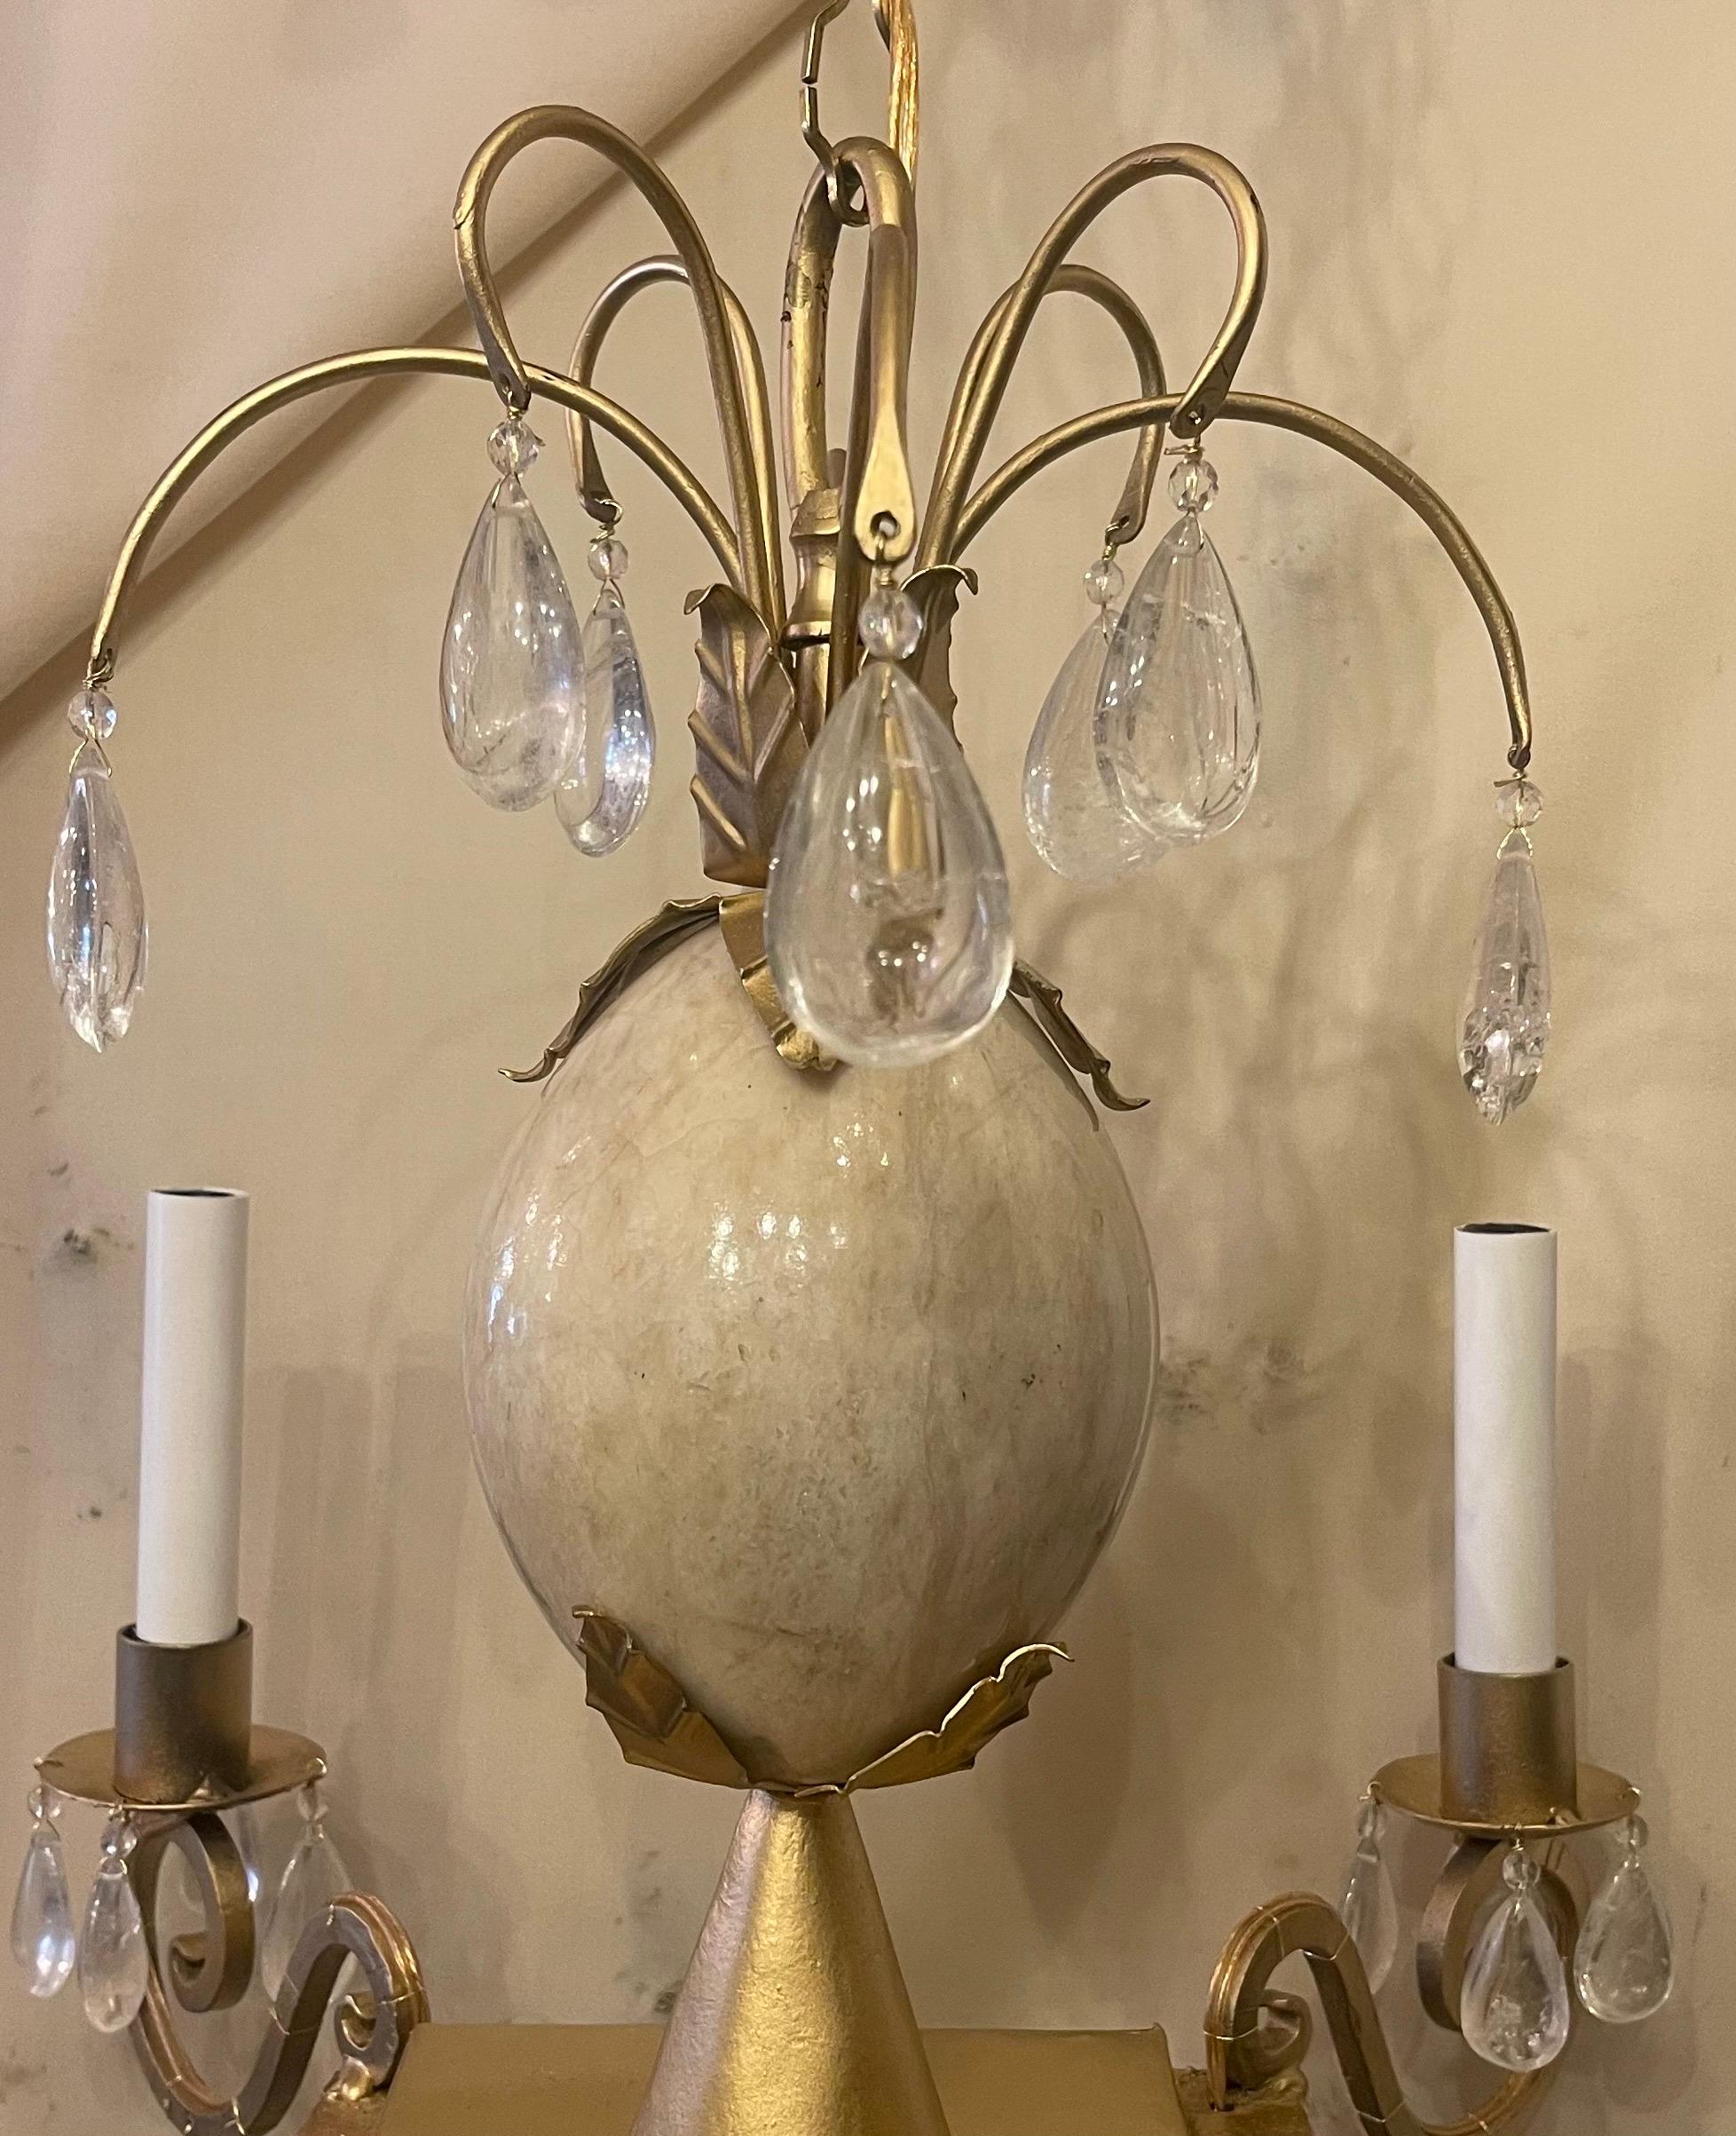 A Wonderful Mid-Century Maison Baguès Marble Center With Rock Crystal Drops On A Gold Gilt 4 Candelabra Light Fixture